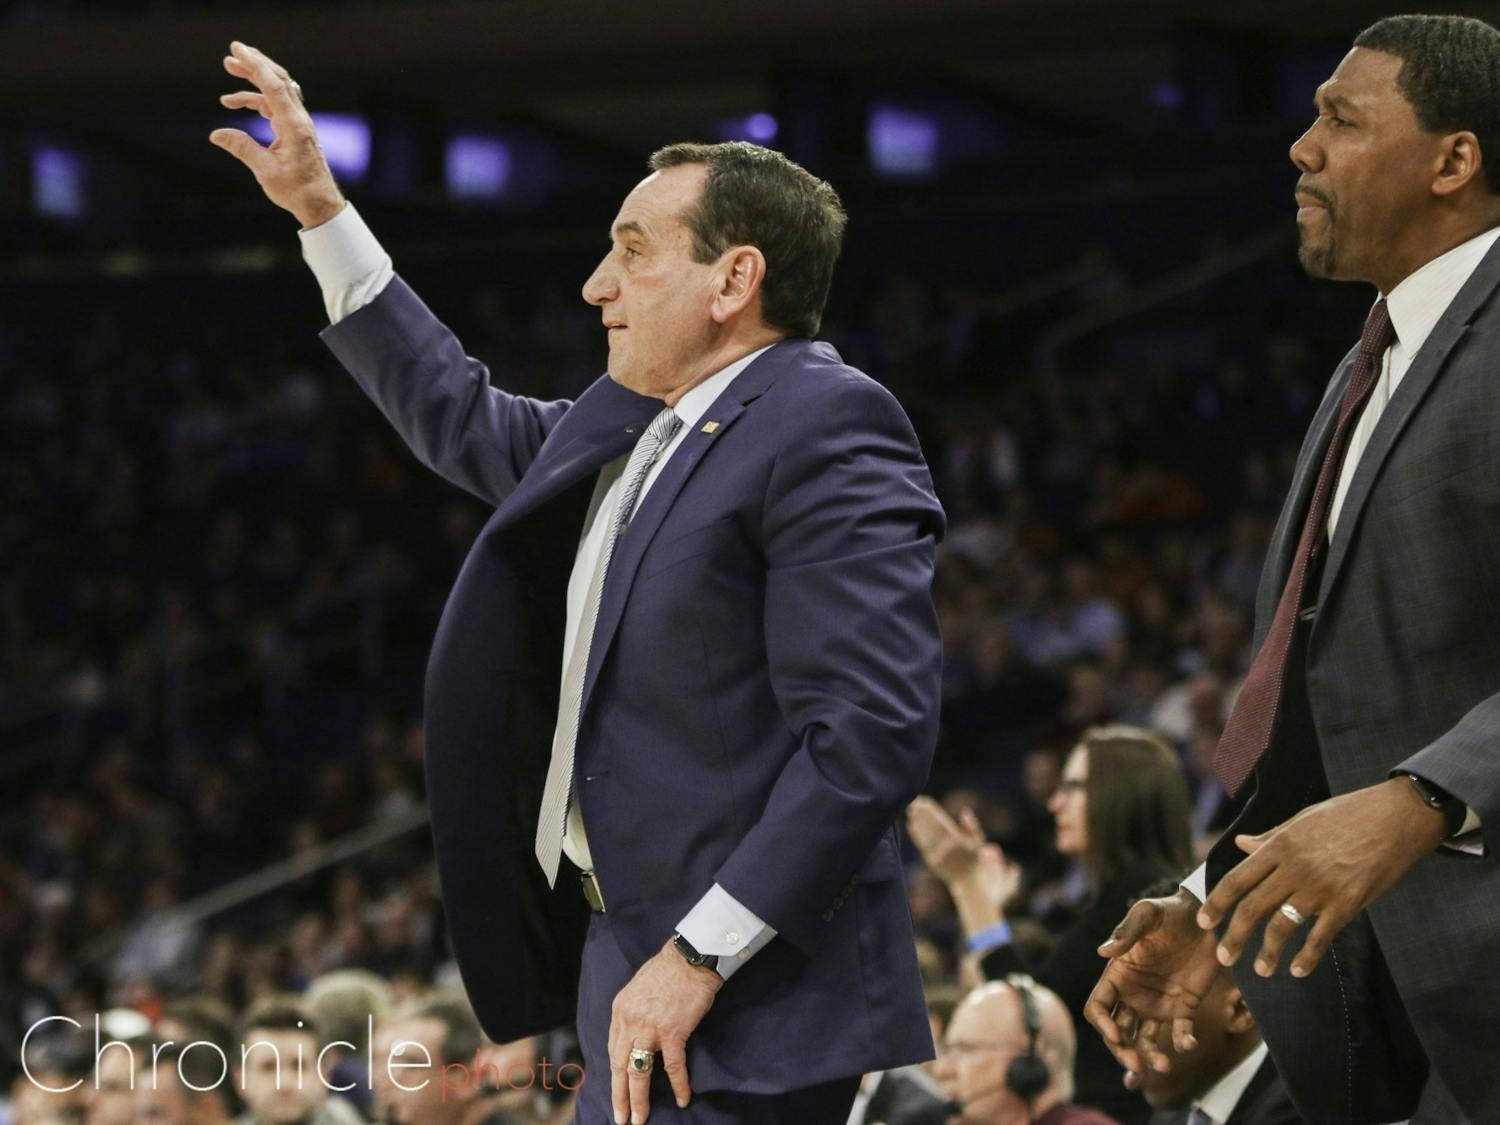 Krzyzewski called Williams "one of the greatest coaches in college basketball history."